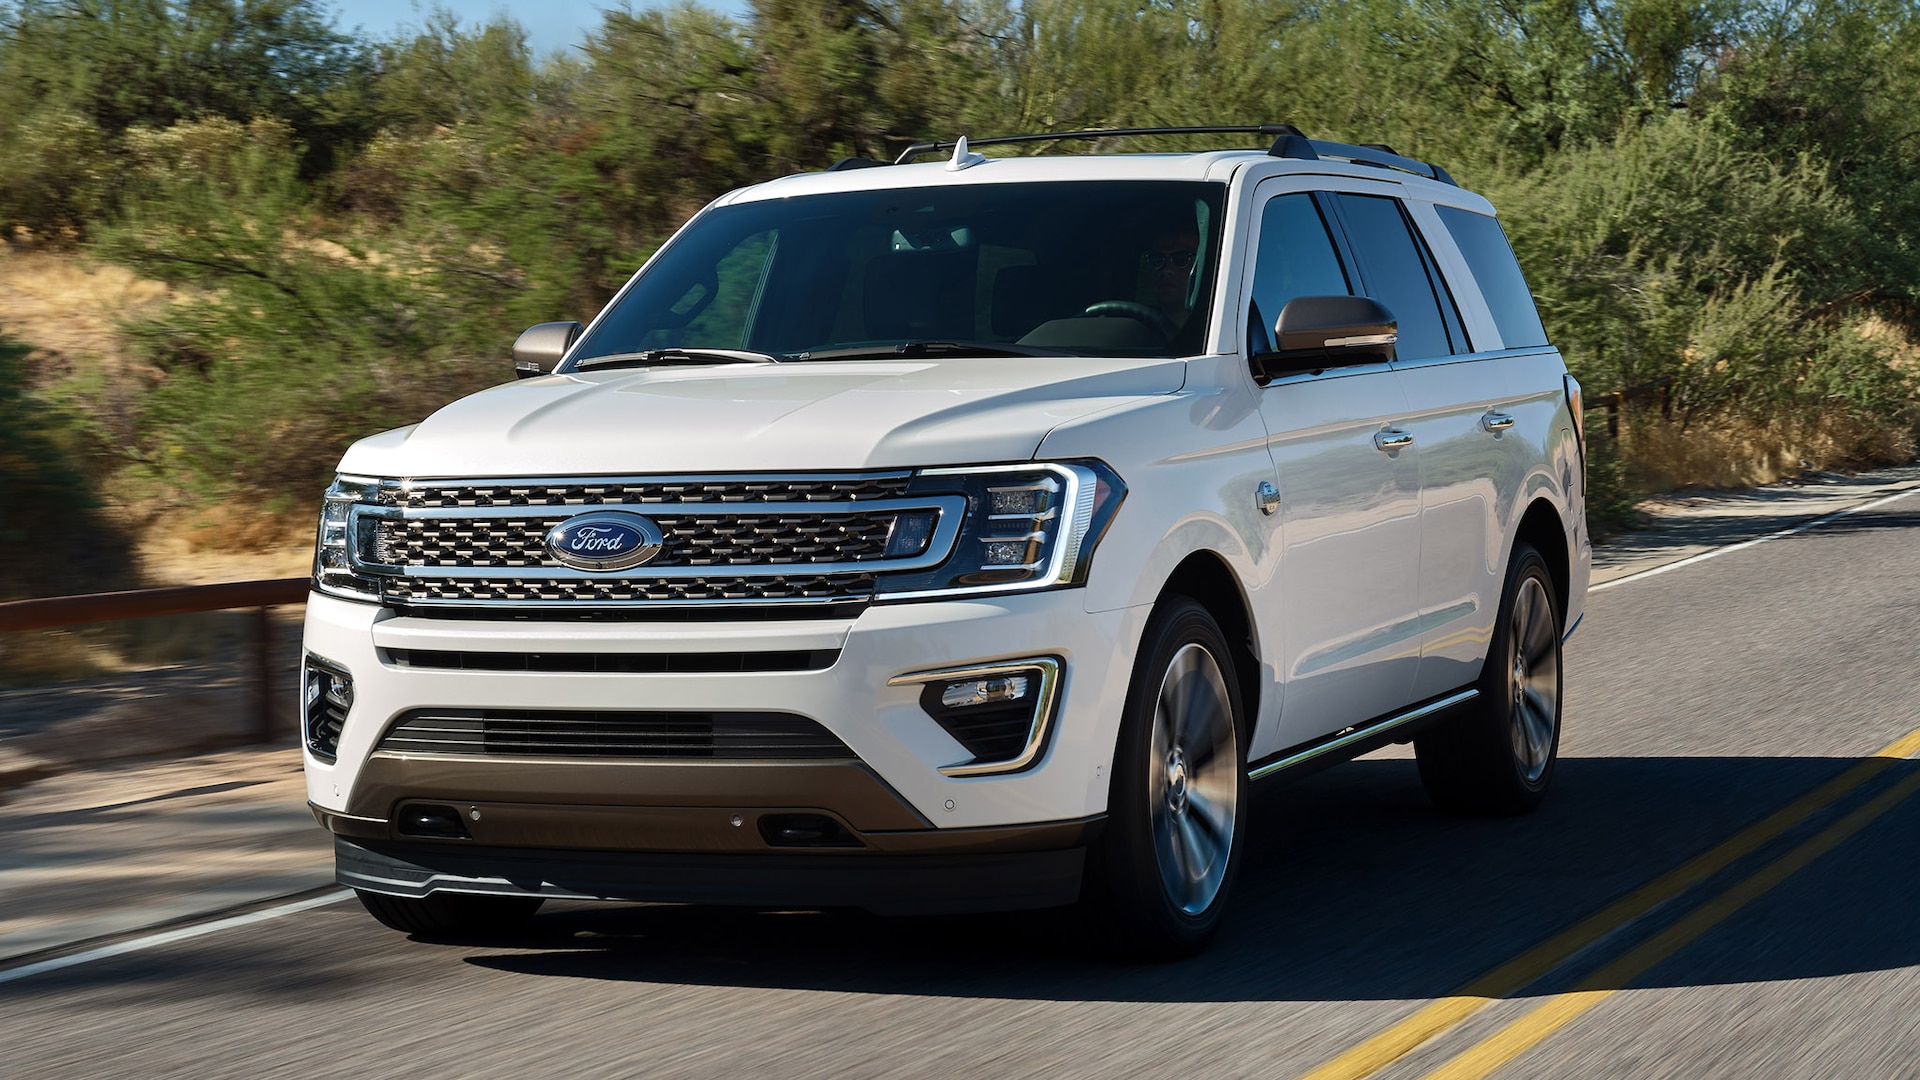 2020 Ford Expedition Adds King Ranch Trim, Sees Platinum Model Upgraded